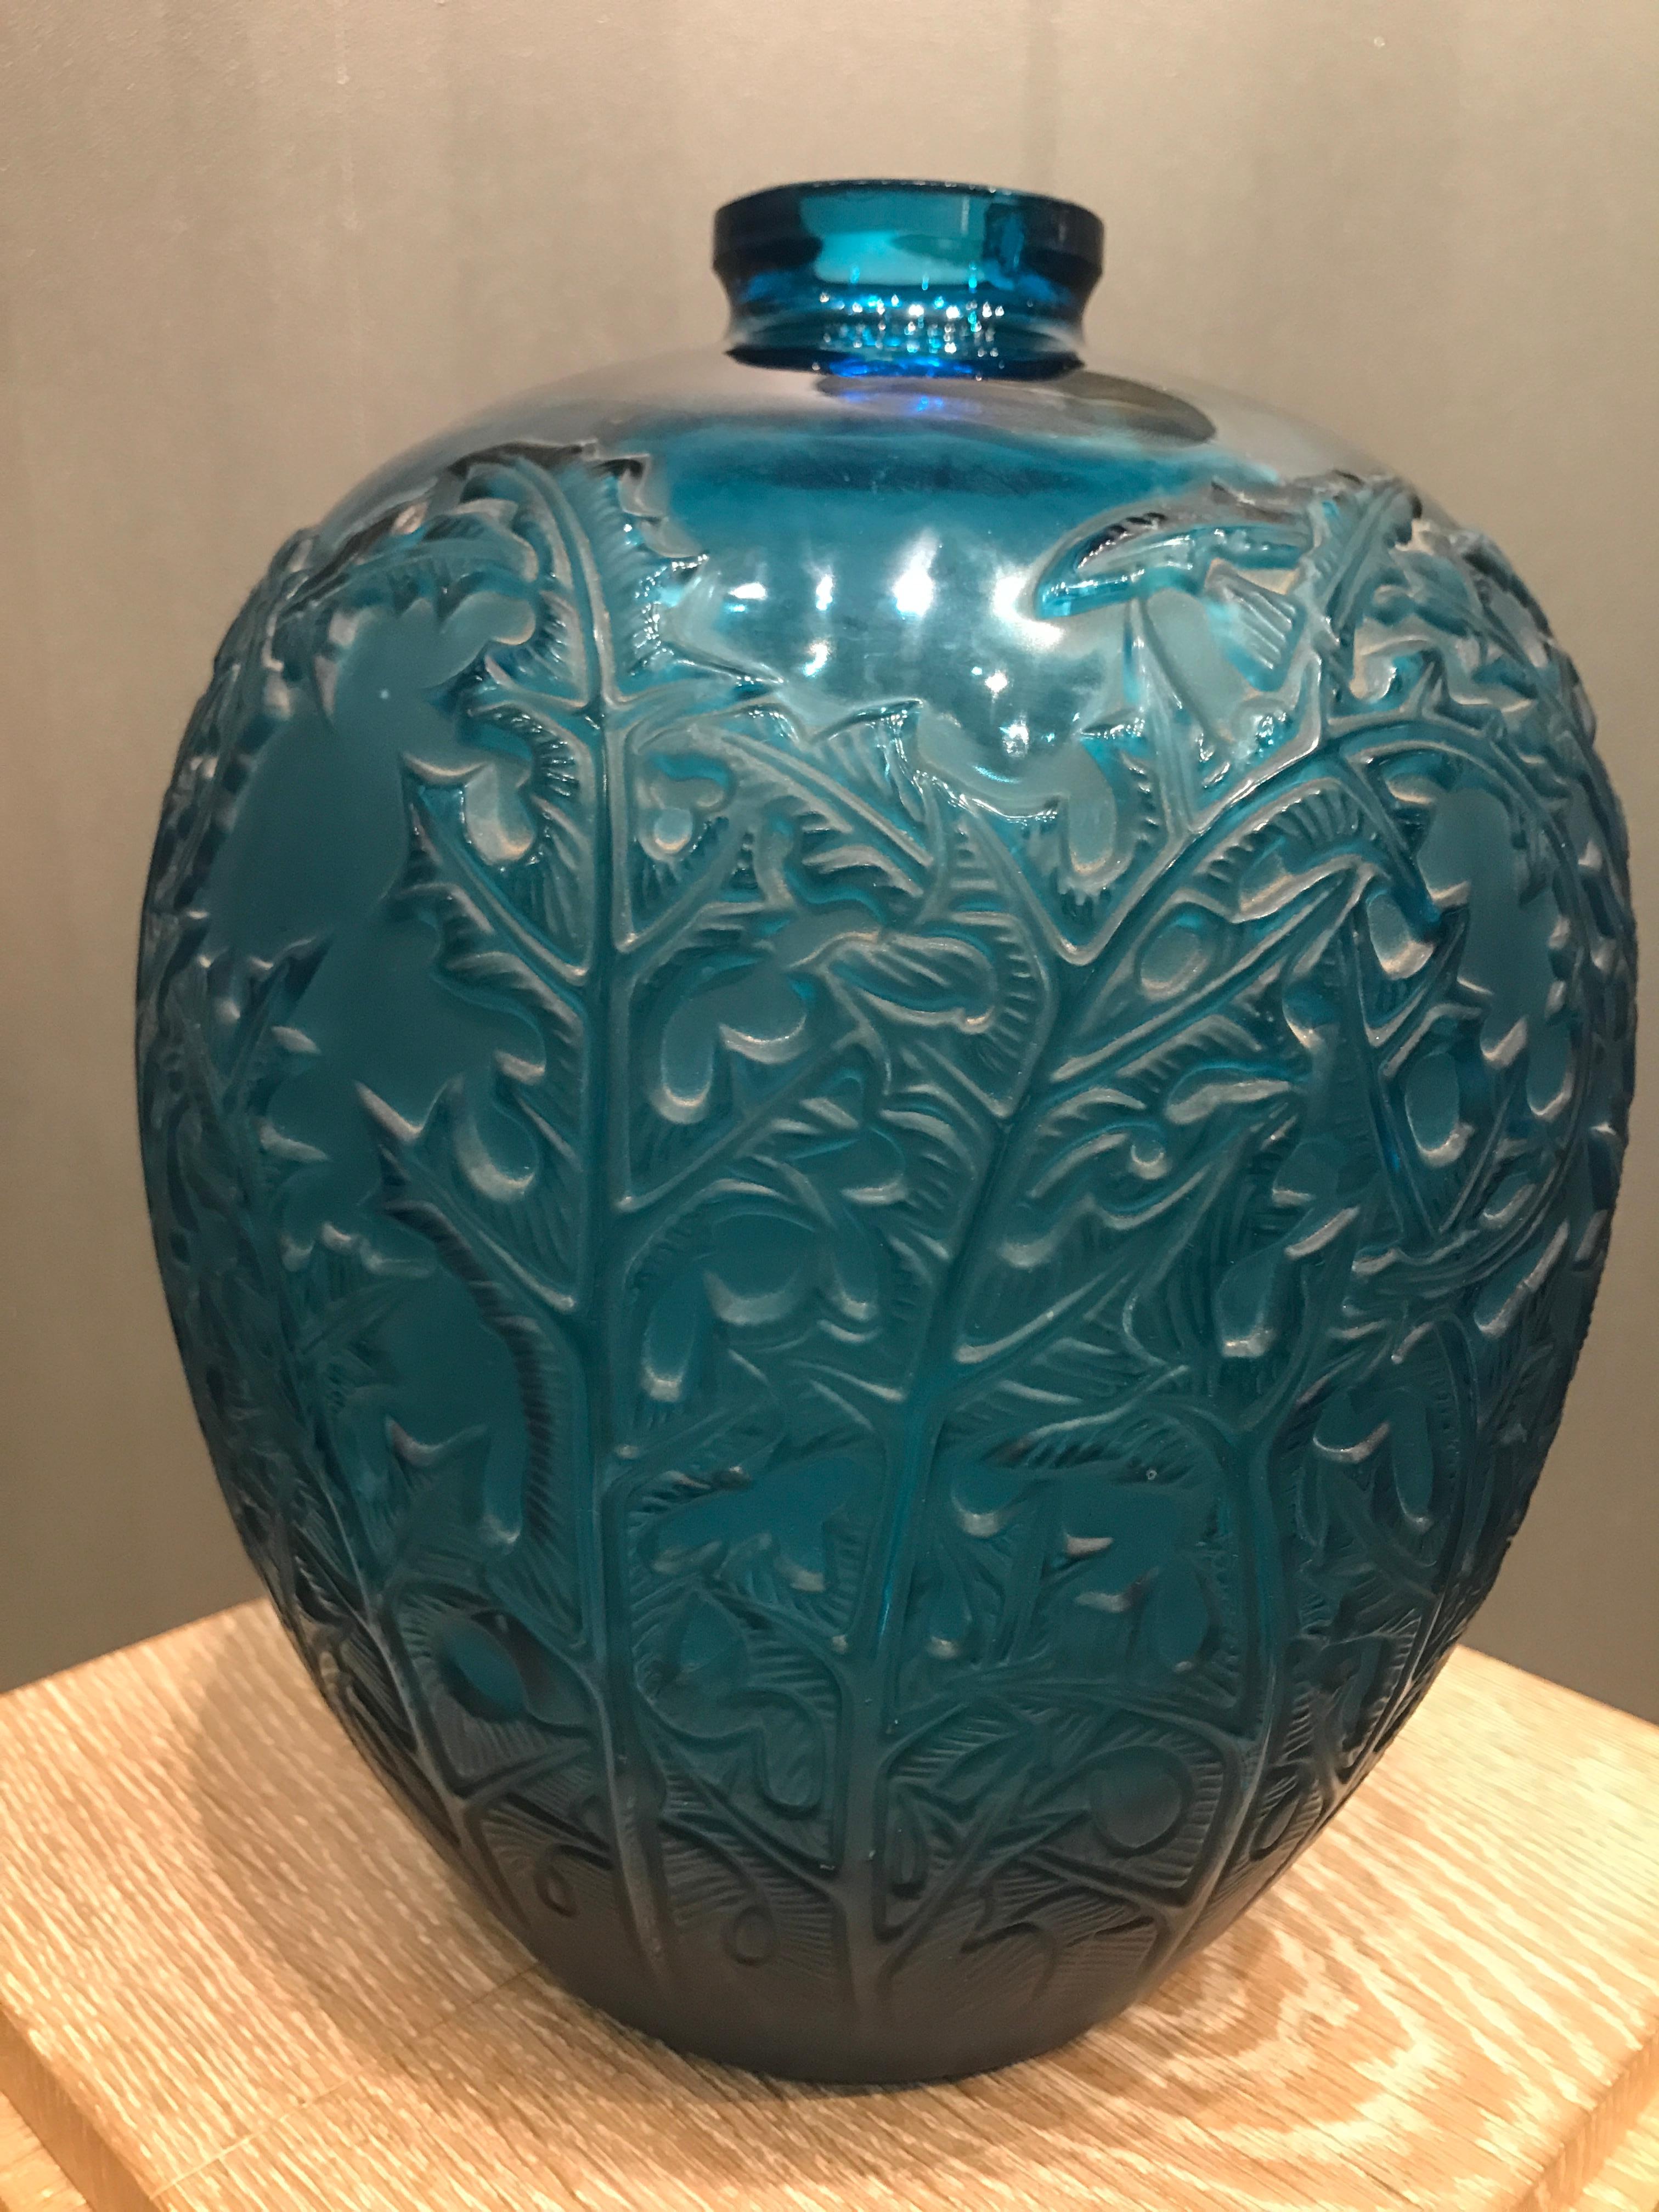 Art Deco 1921 Rene Lalique Acanthes Vase in Electric Blue Glass